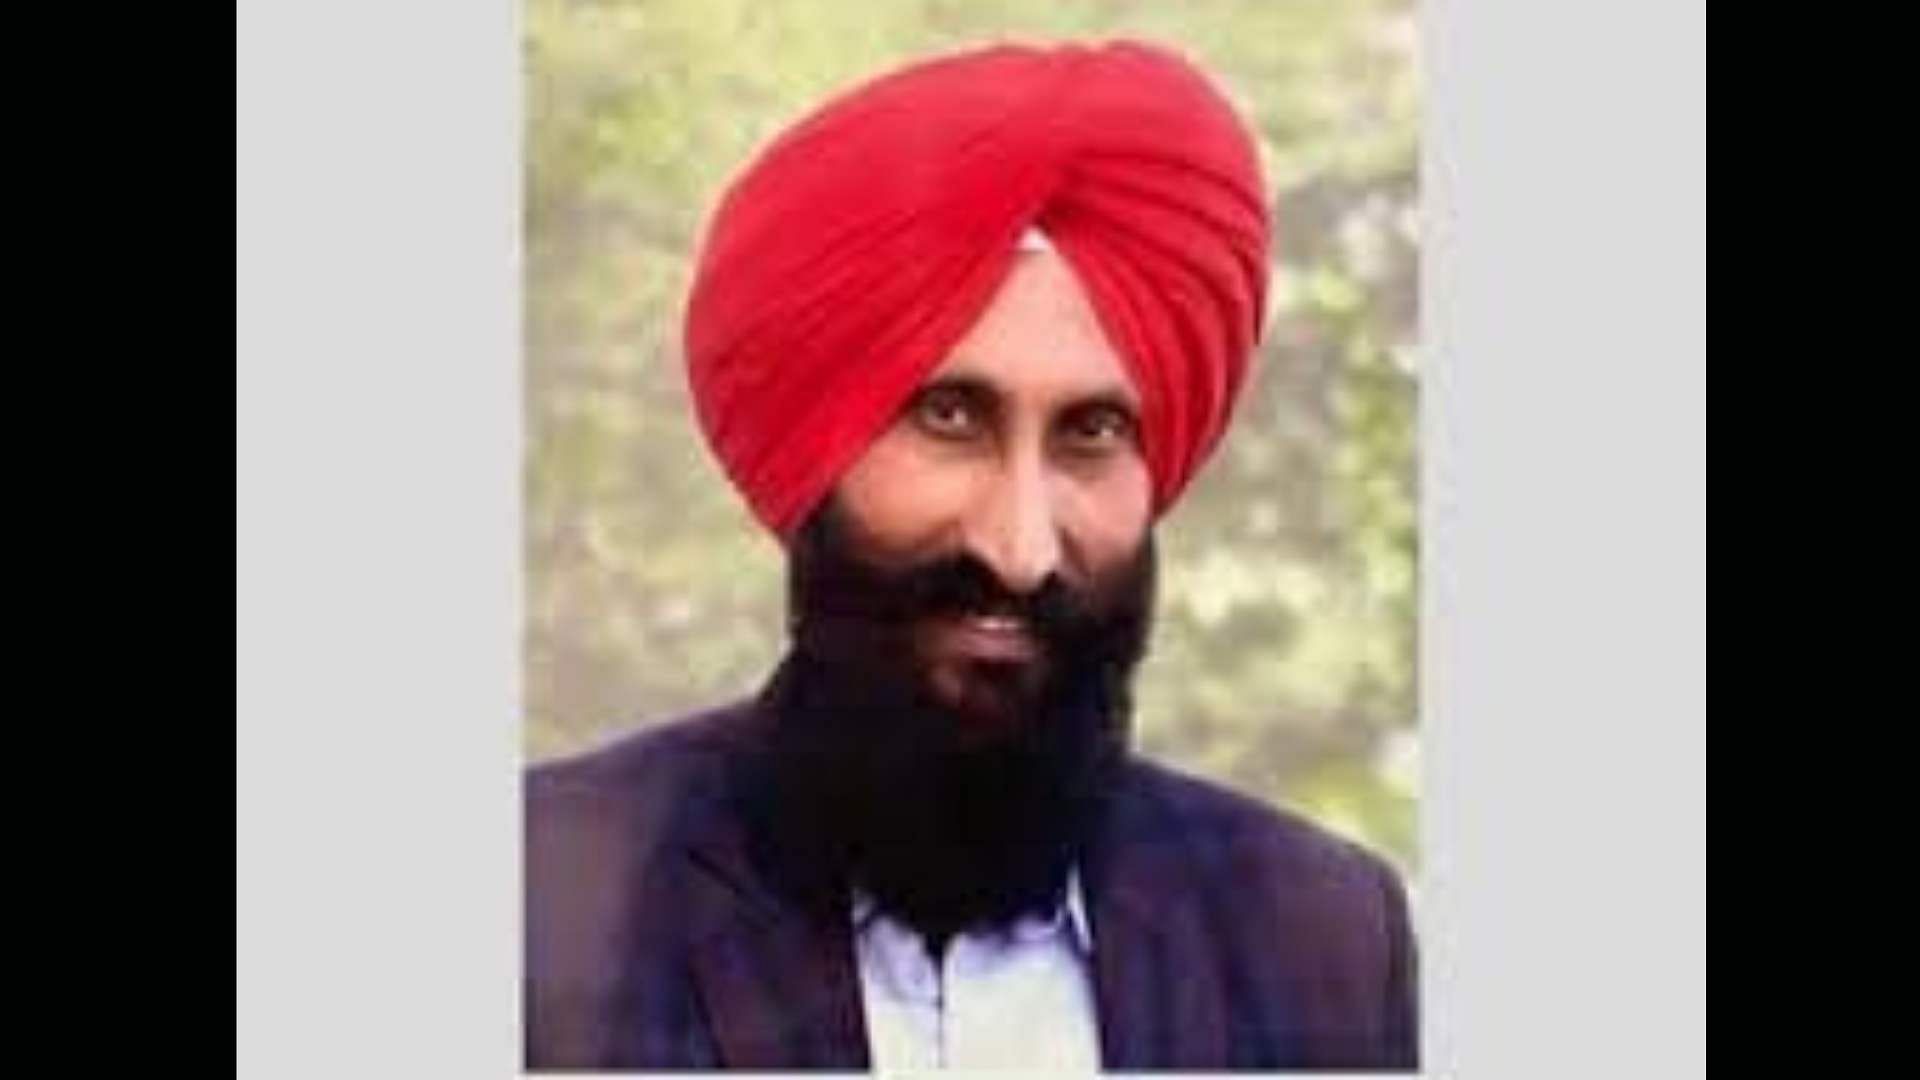 Balwinder Singh was known to have stood up against terrorism and survived multiple attempts by militants.